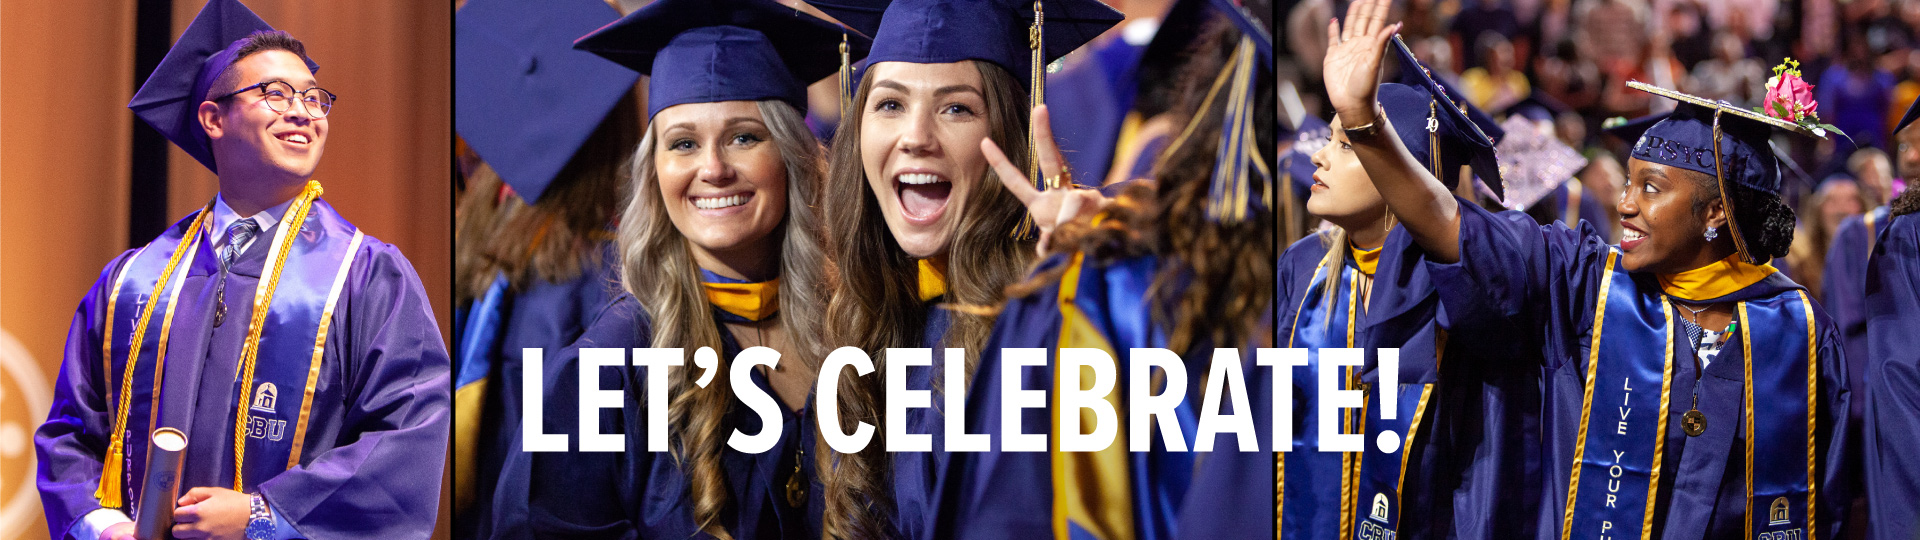 Students celebrating at Commencement with the words "Let's Celebrate"